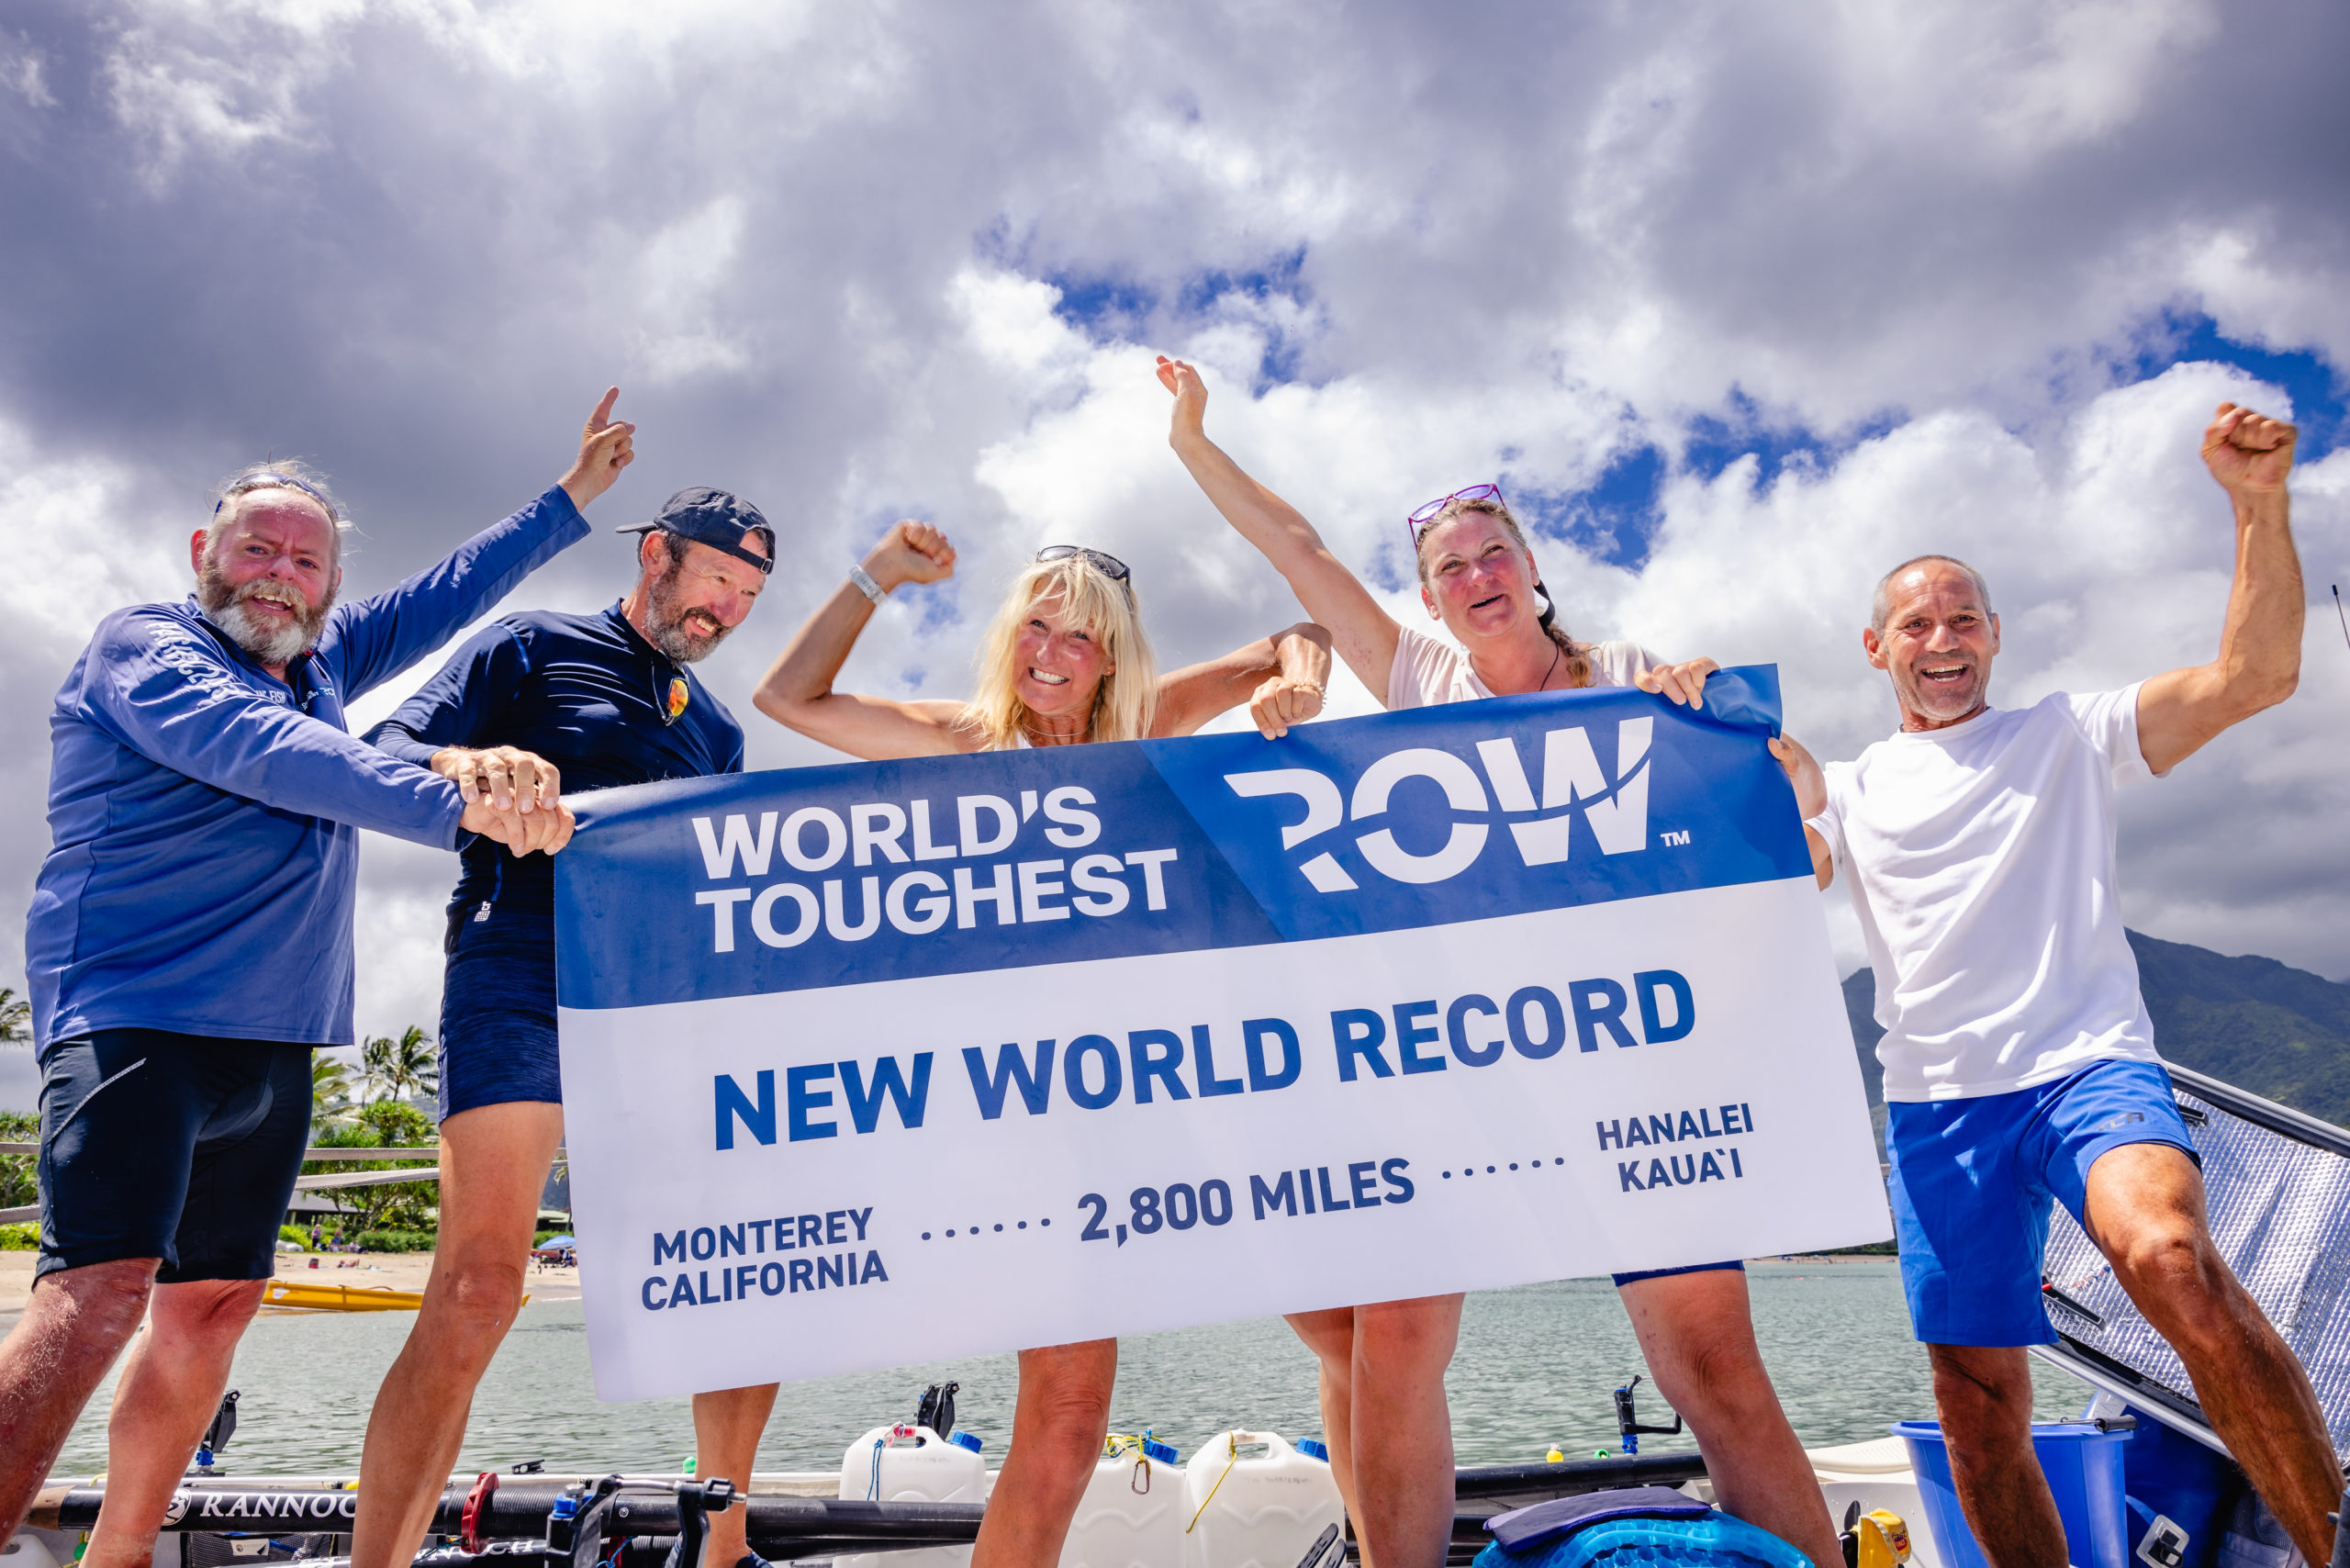 Five people holding a banner marking the completion of the world's toughest row.